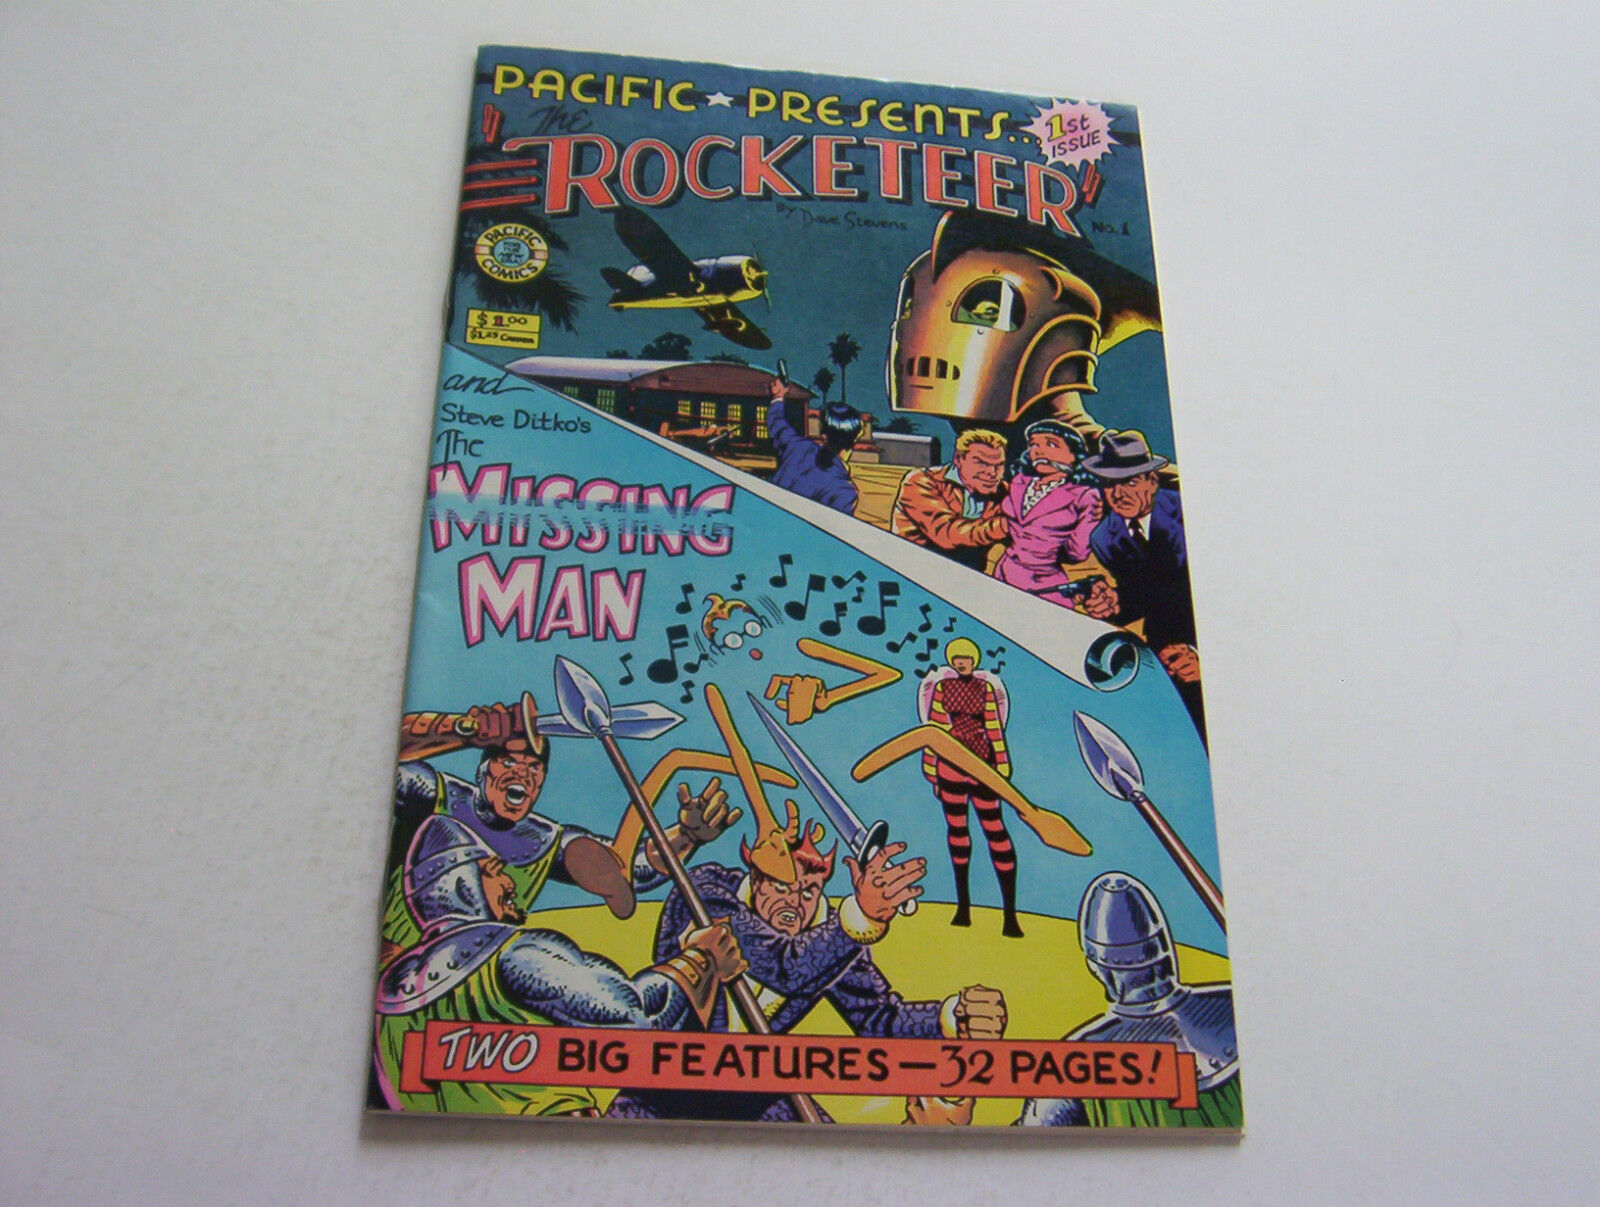 PACIFIC PRESENTS..THE ROCKETEER   #1 OCT 1982  BETTIE PAGE ON COVER  NEAR MINT-